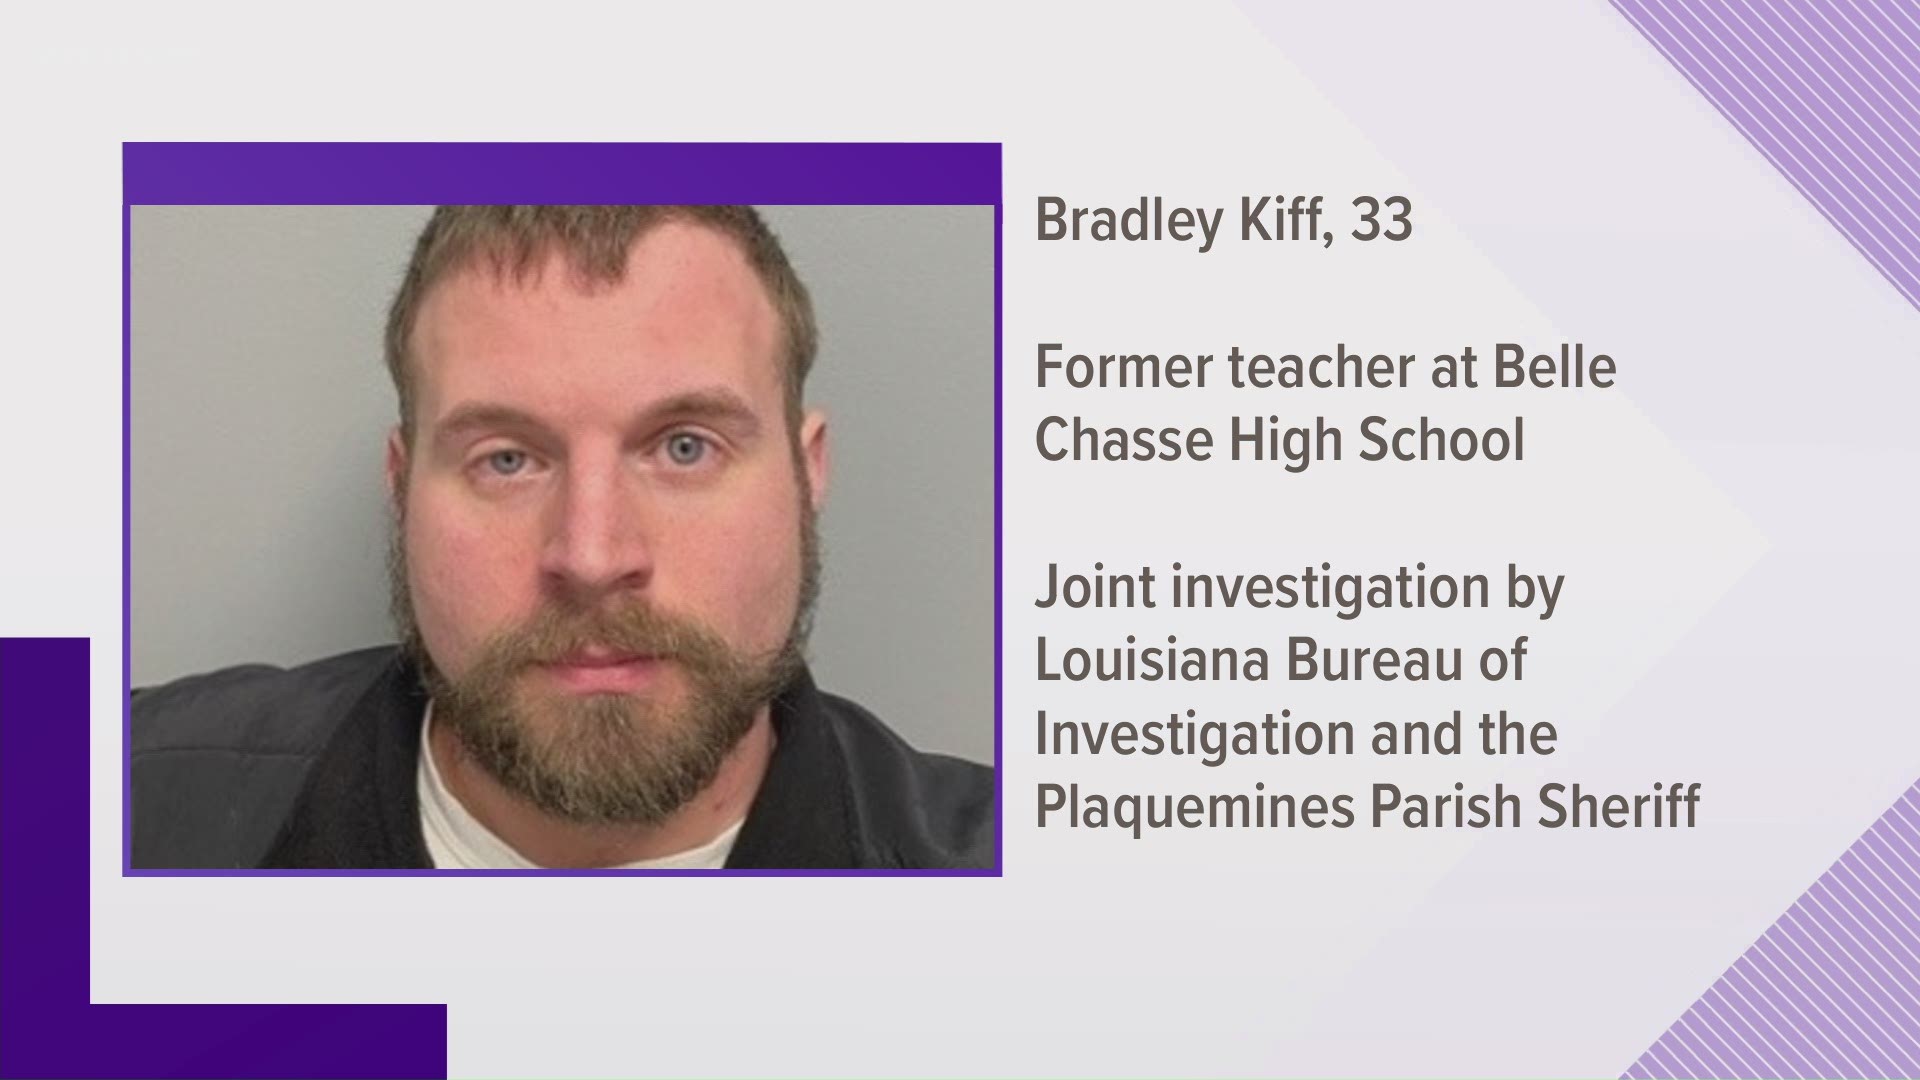 Kiff's Facebook profile said he taught at Haynes Academy in 2011, at John Ehret from 2011 to 2019, and at Belle Chasse High School from Aug. 2019 to Feb. 2020.